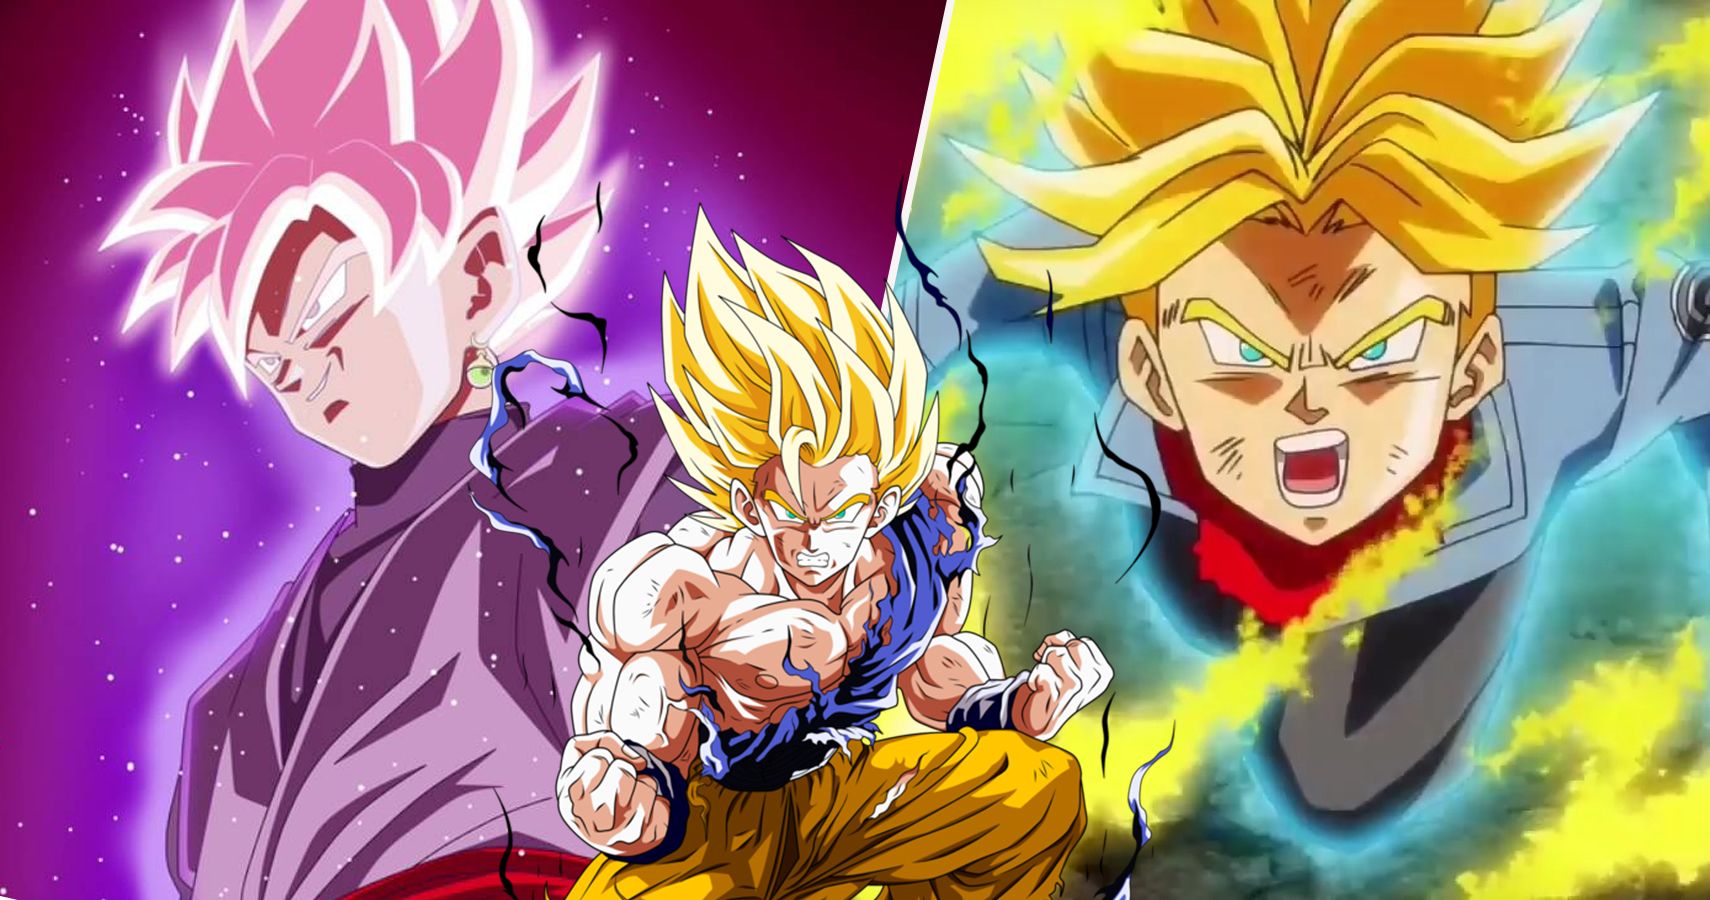 Final Form The 25 Strongest Dragon Ball Transformations Of All Time Officially Ranked - all frieza race forms including true golden in roblox dragon